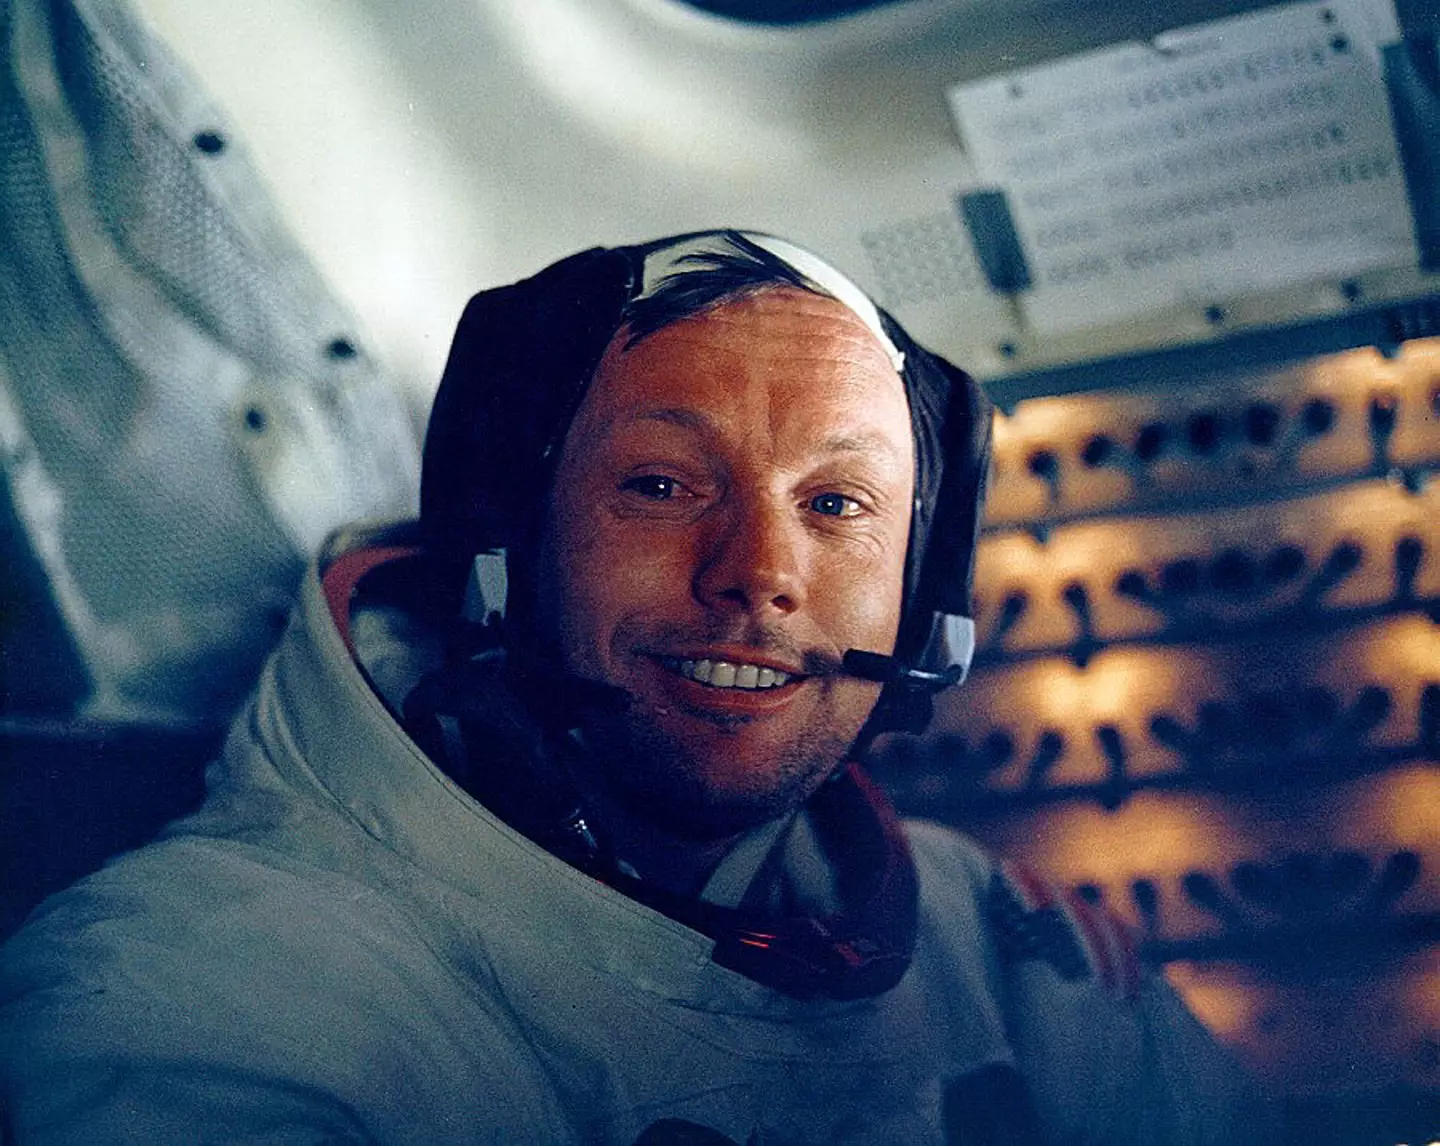 Neil Armstrong hasn't got many photographs from his time on the Moon. (Nasa/Getty Images)